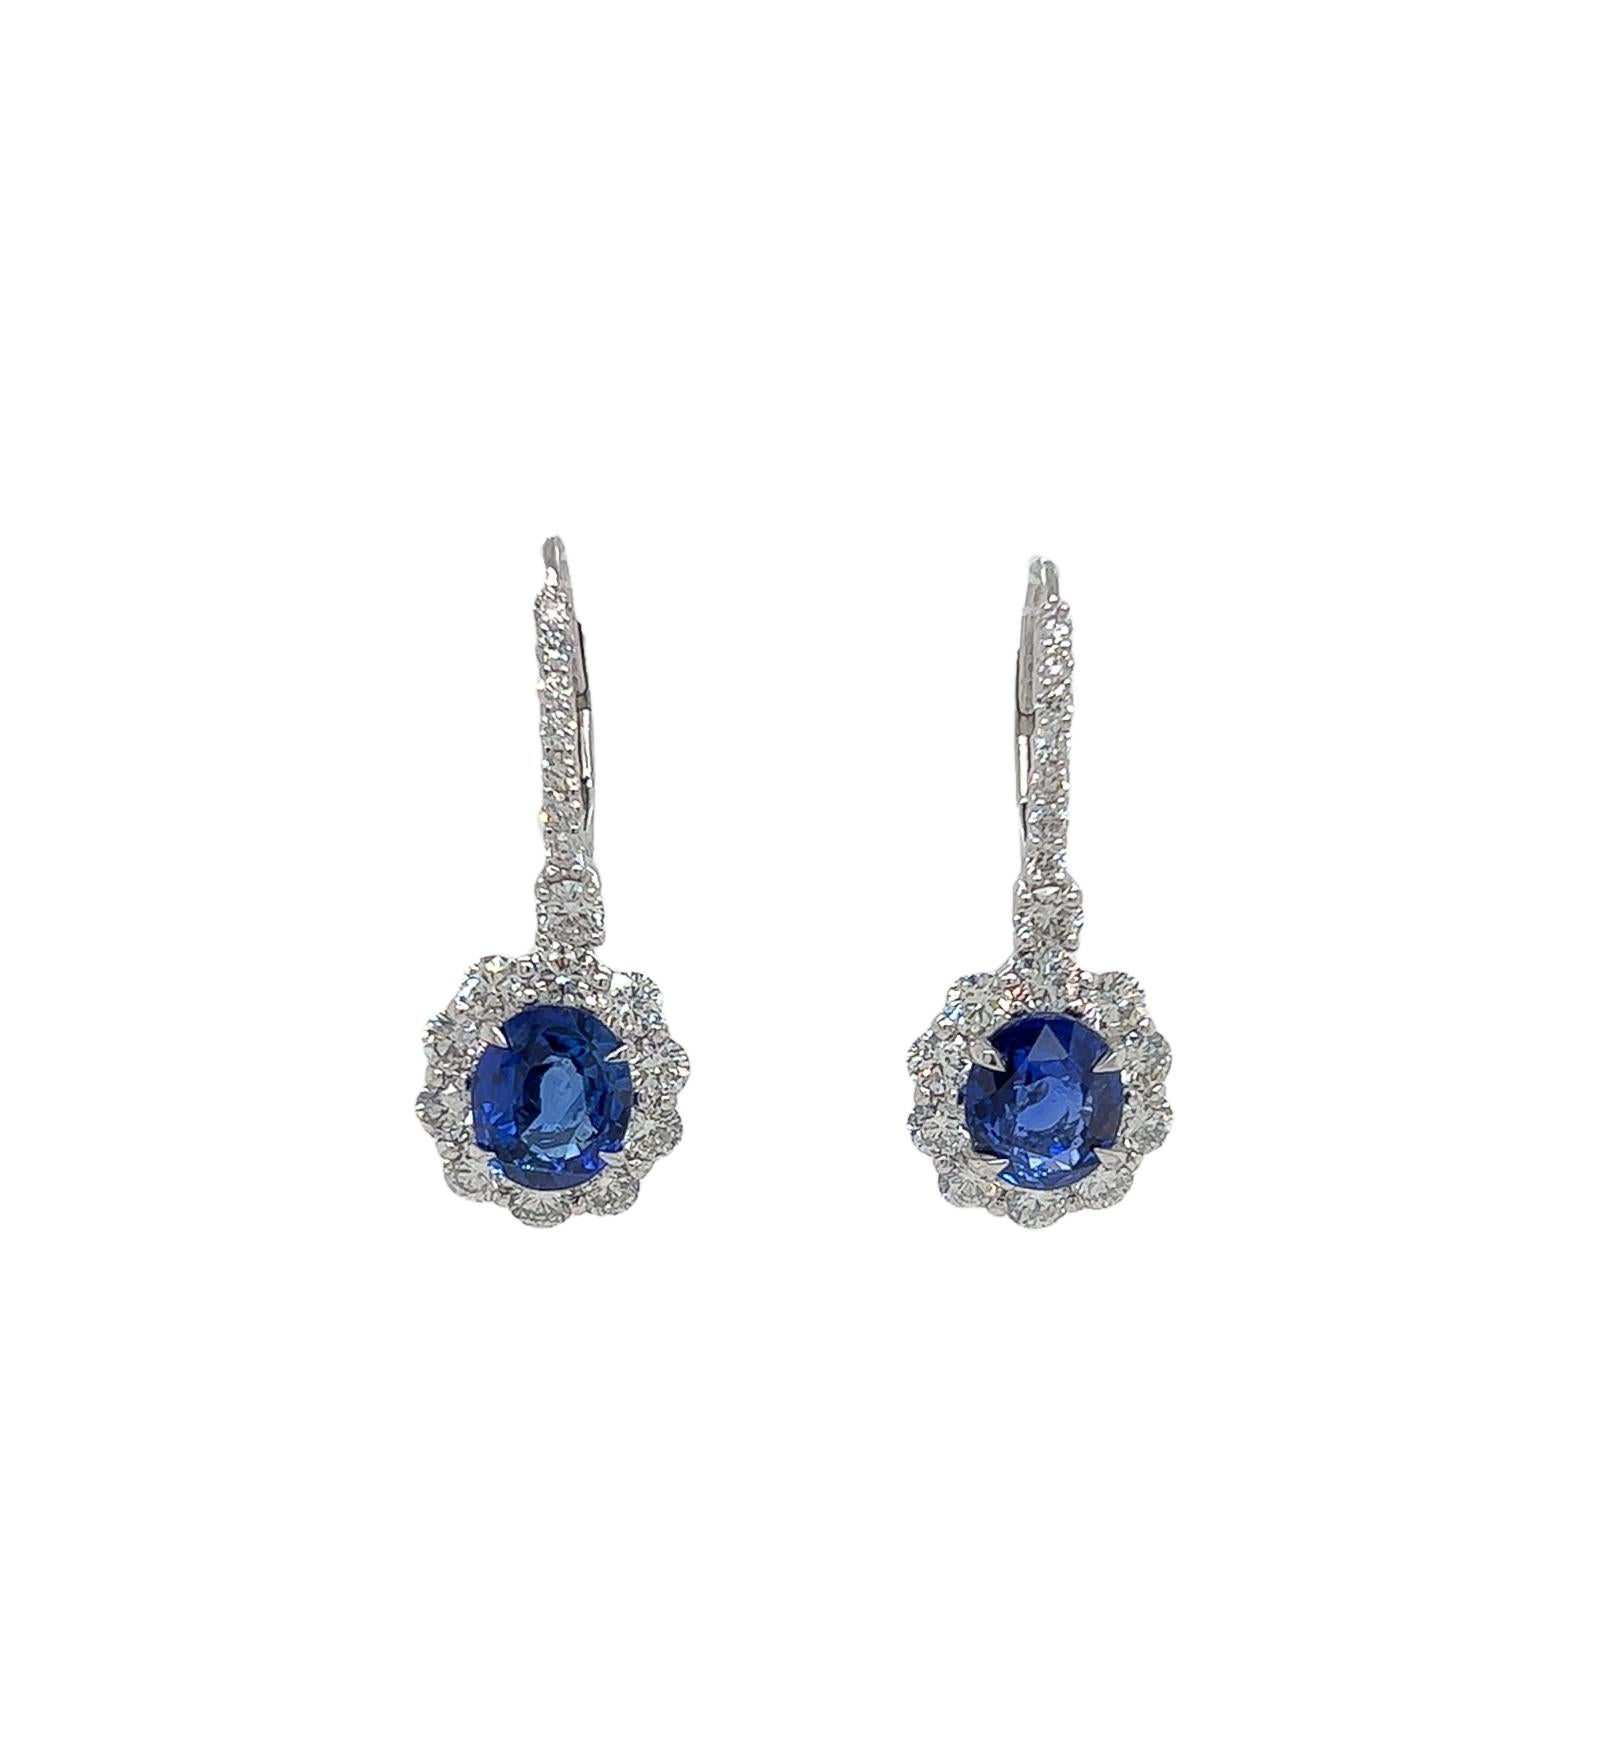 9.26 Total Carat Blue Sapphire and Diamond Drop Earrings in Platinum

This gorgeous pair of Sapphire earrings are sure to draw all eyes on you. It is created with 6.19 Carats Oval Sapphires, surrounded by a halo and drop of round diamonds totaling a